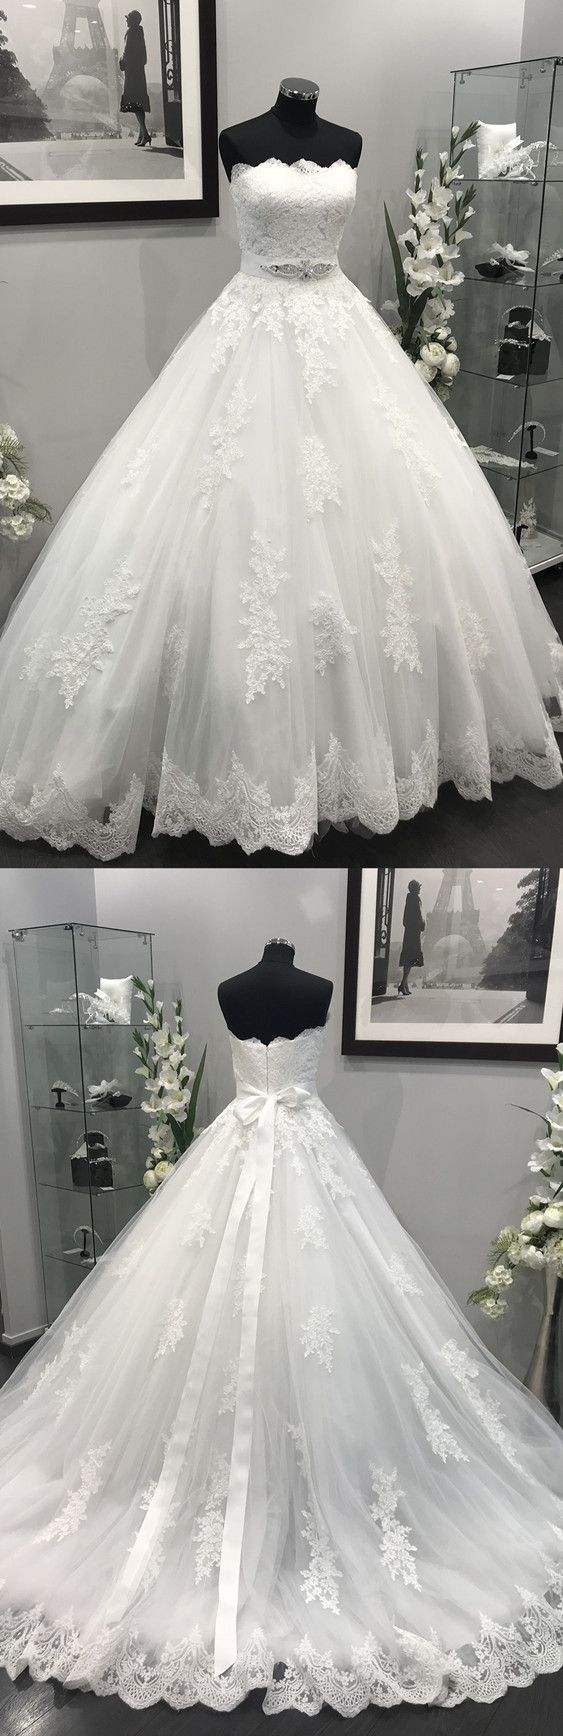 Lace Appliques Crystal Beaded Sashes Tulle Wedding Dresses Ball Gowns, Pricess White Lace Country Wedding Dresses, Women Wedding Gowns